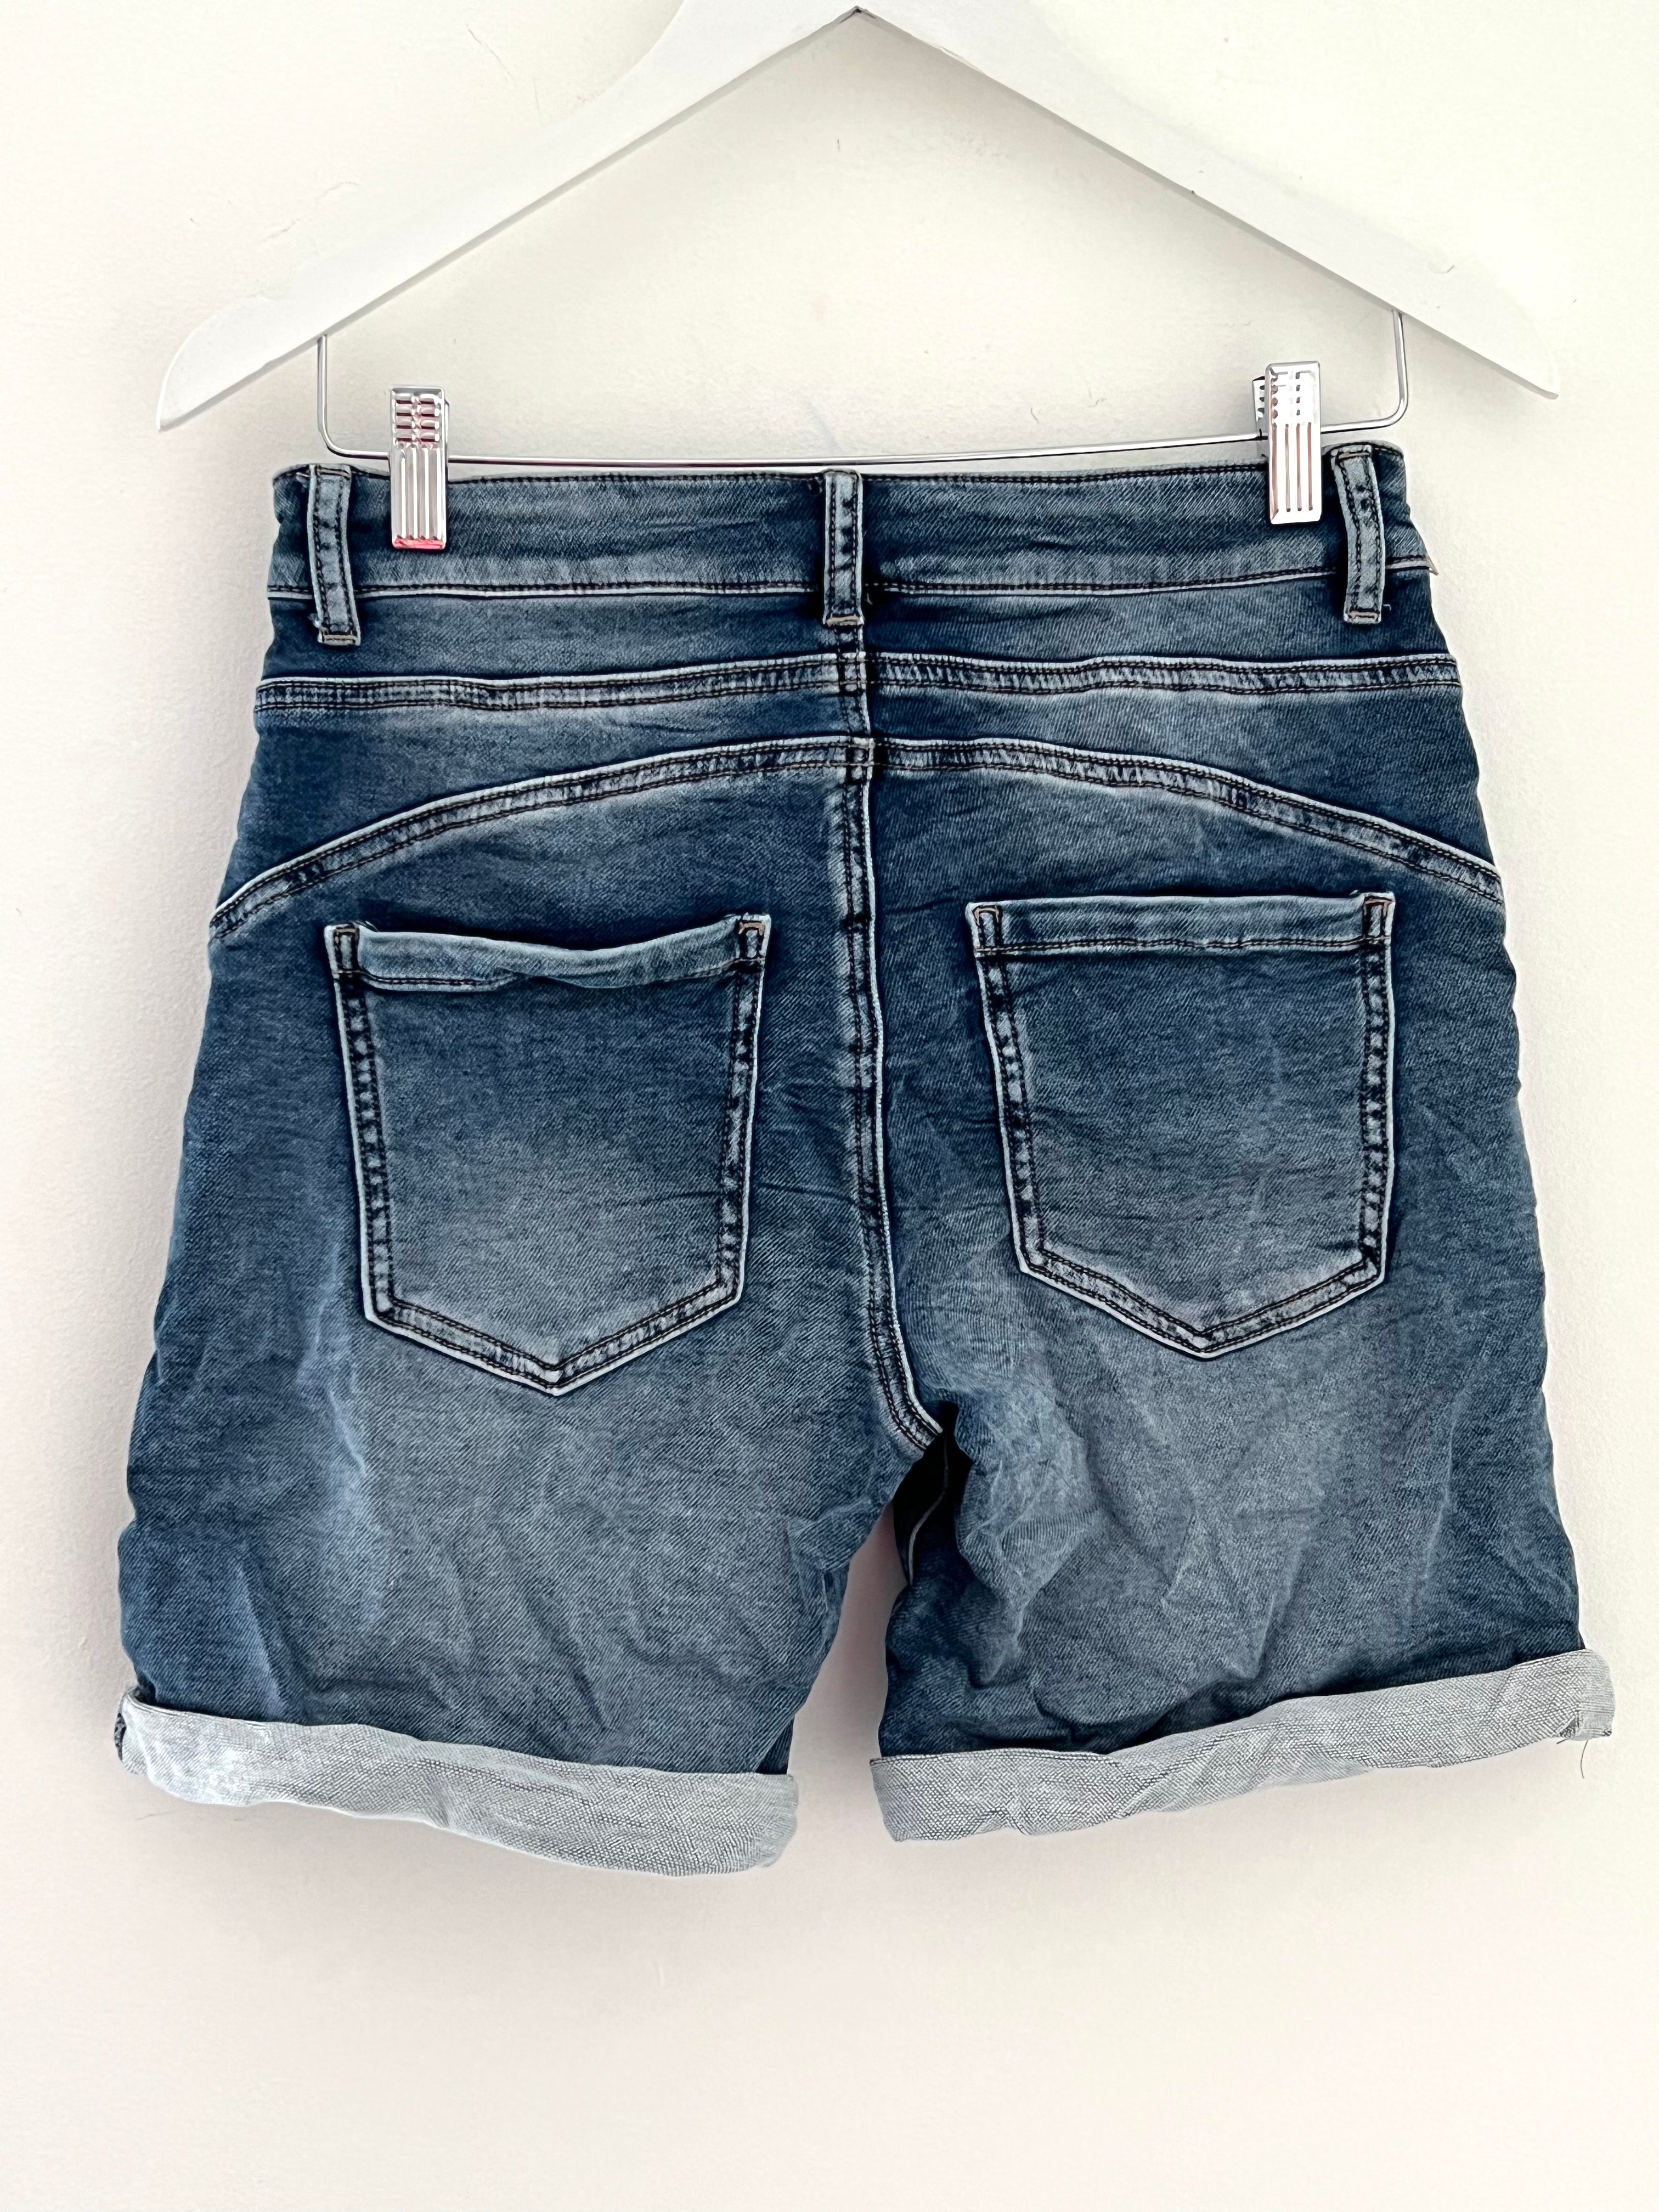 Covered Button Fly Shorts in Denim